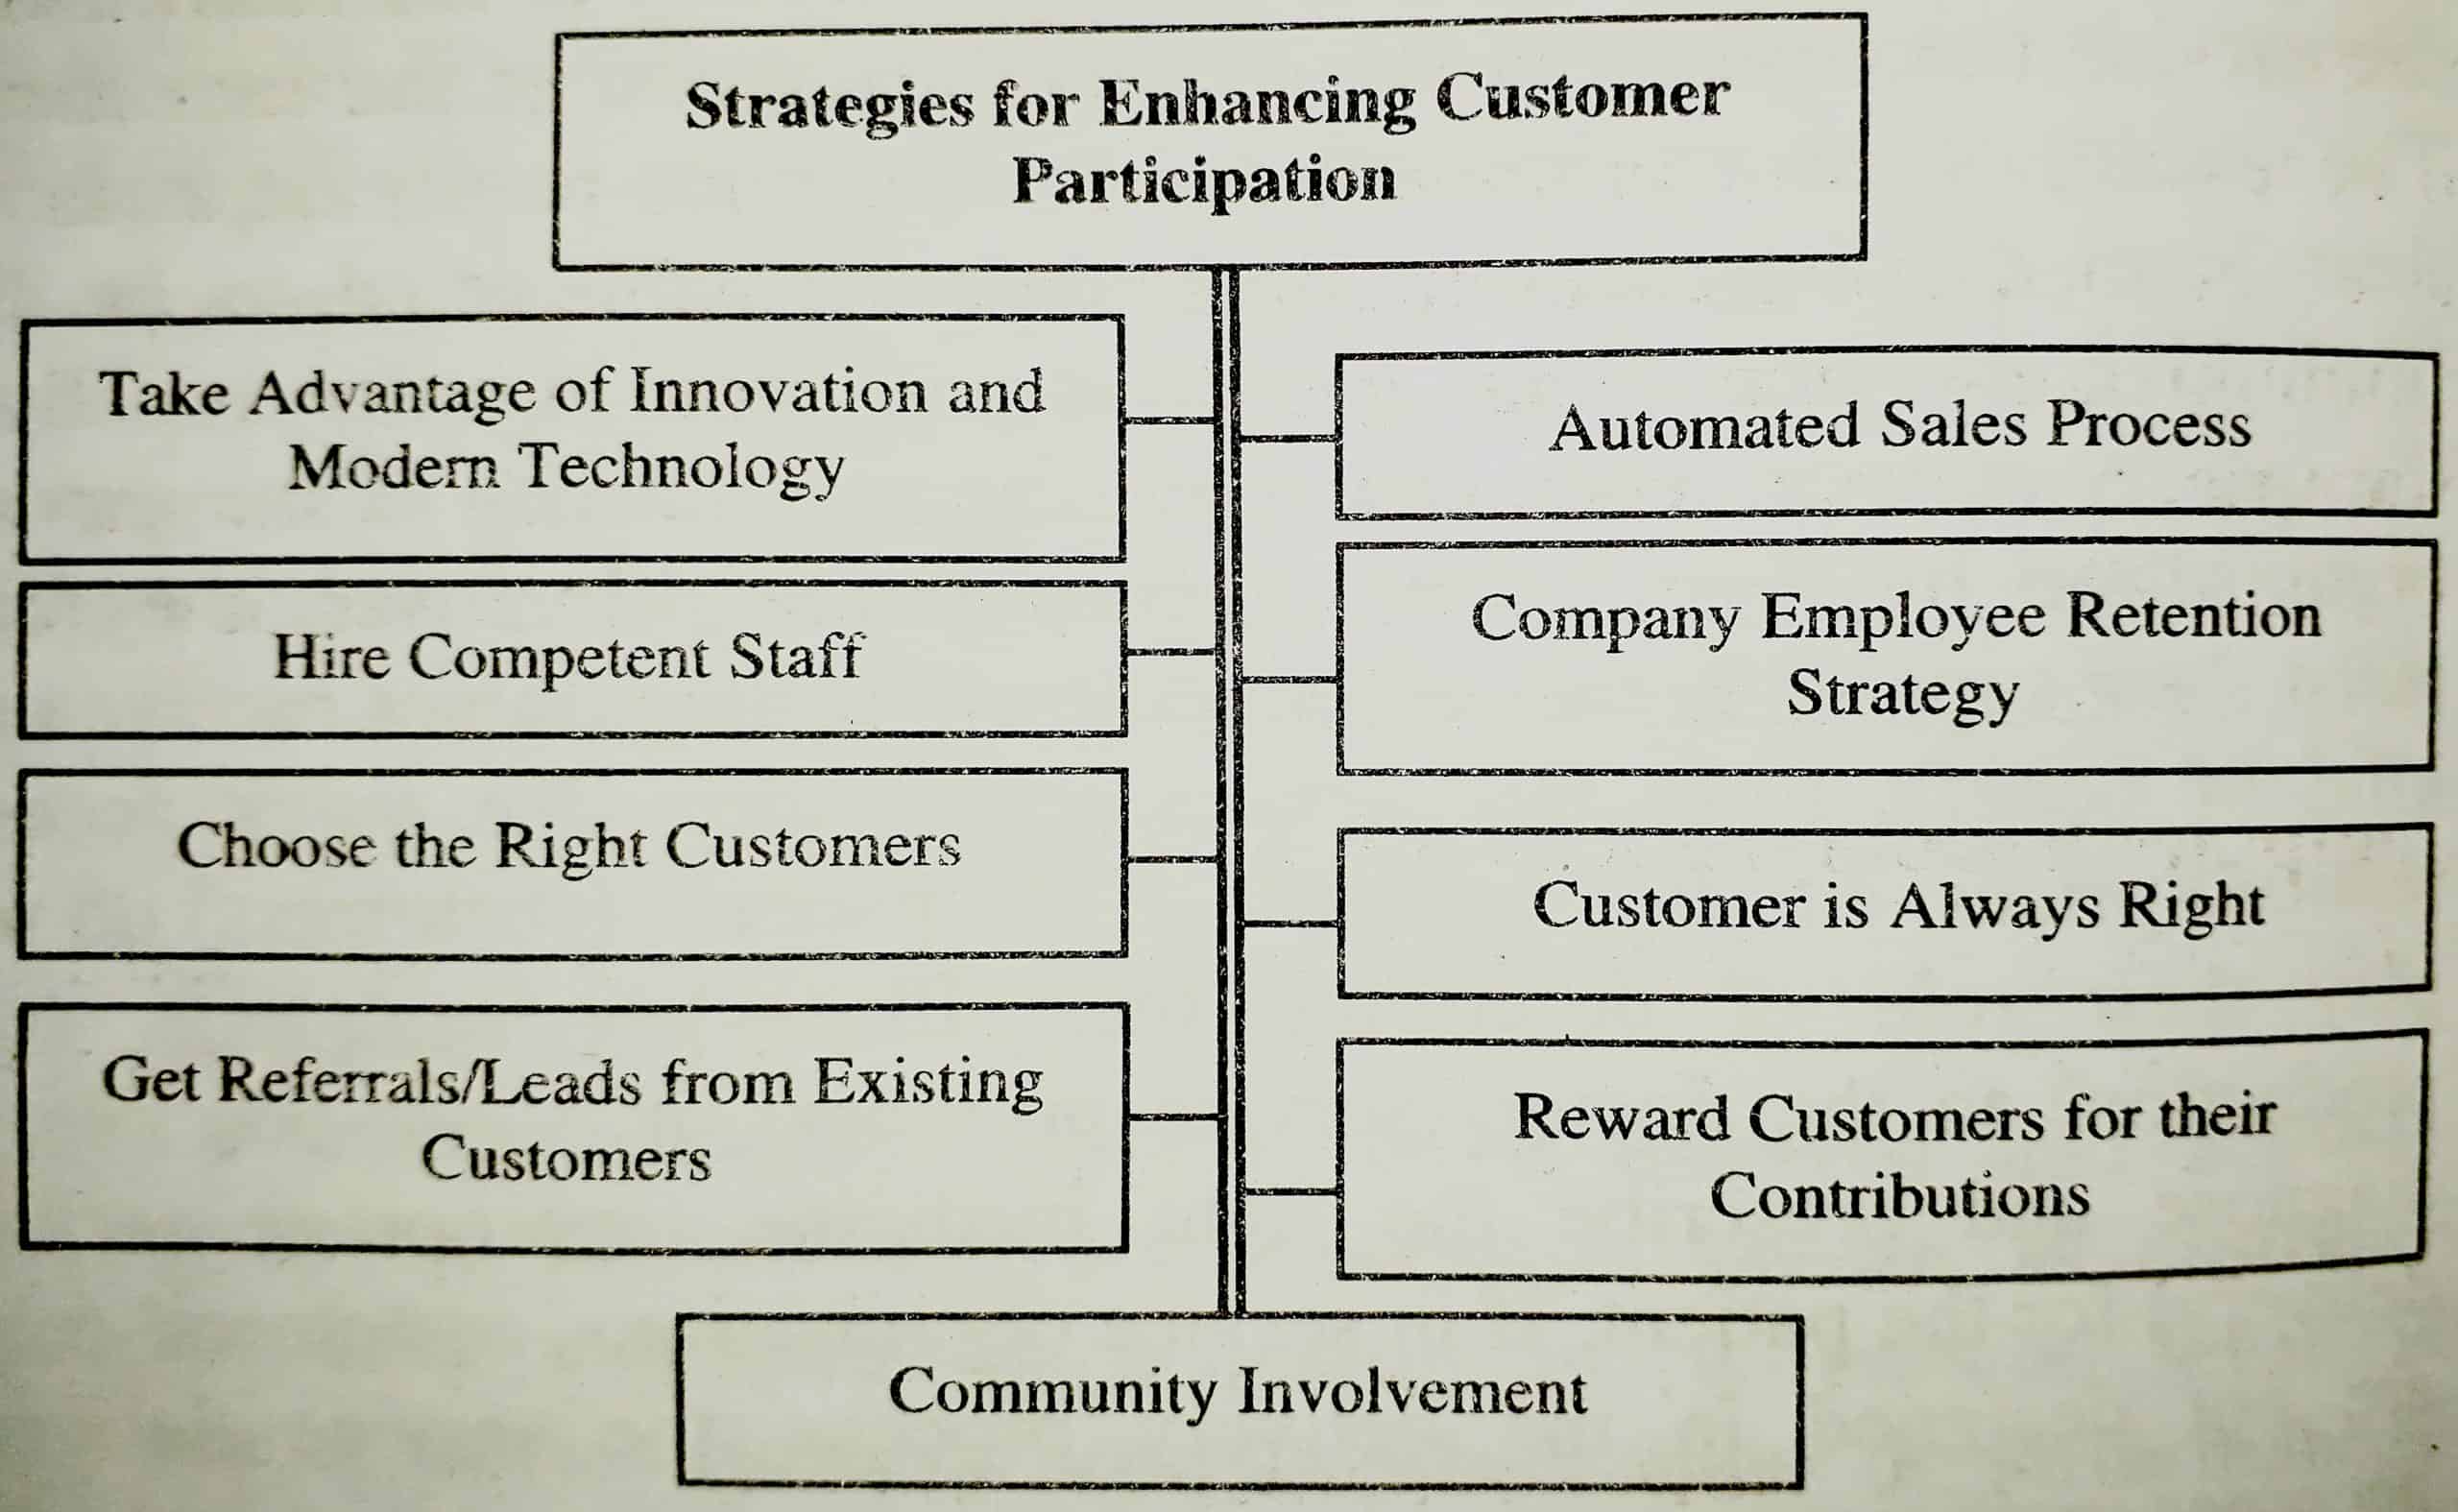 Strategies for Enhancing Customer Participation